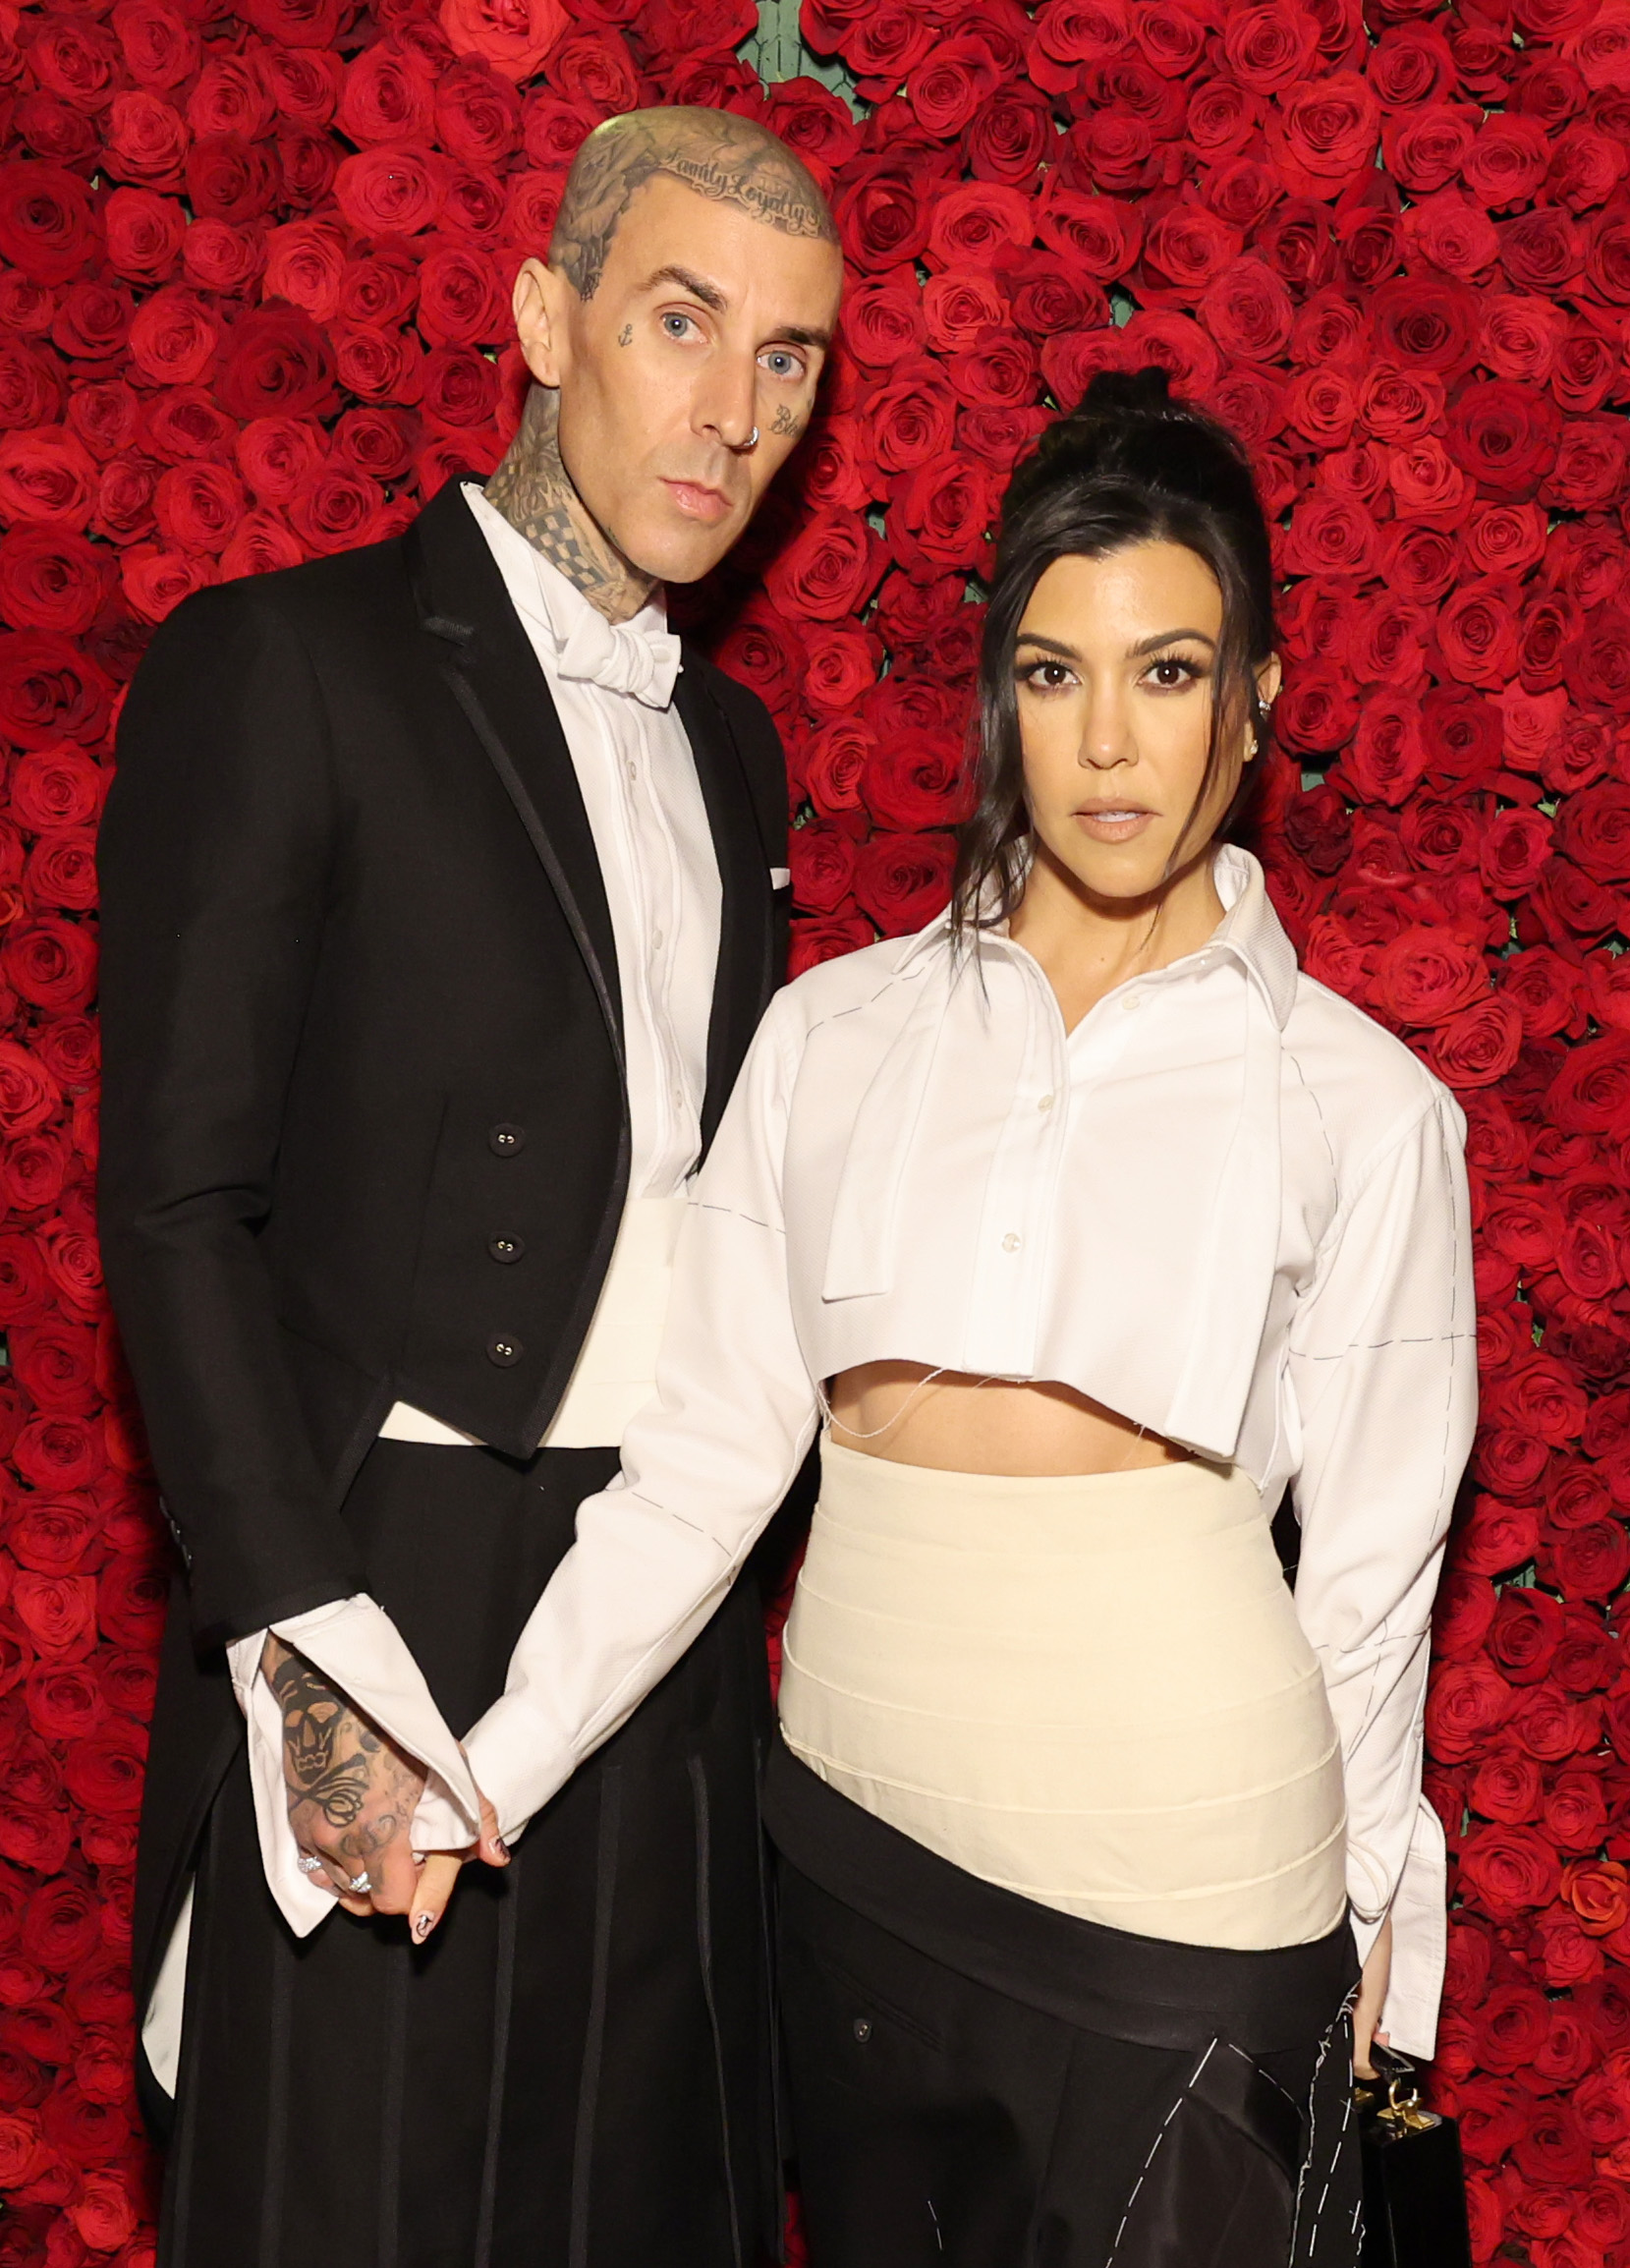 Kourtney and Travis welcomed baby Rocky last year